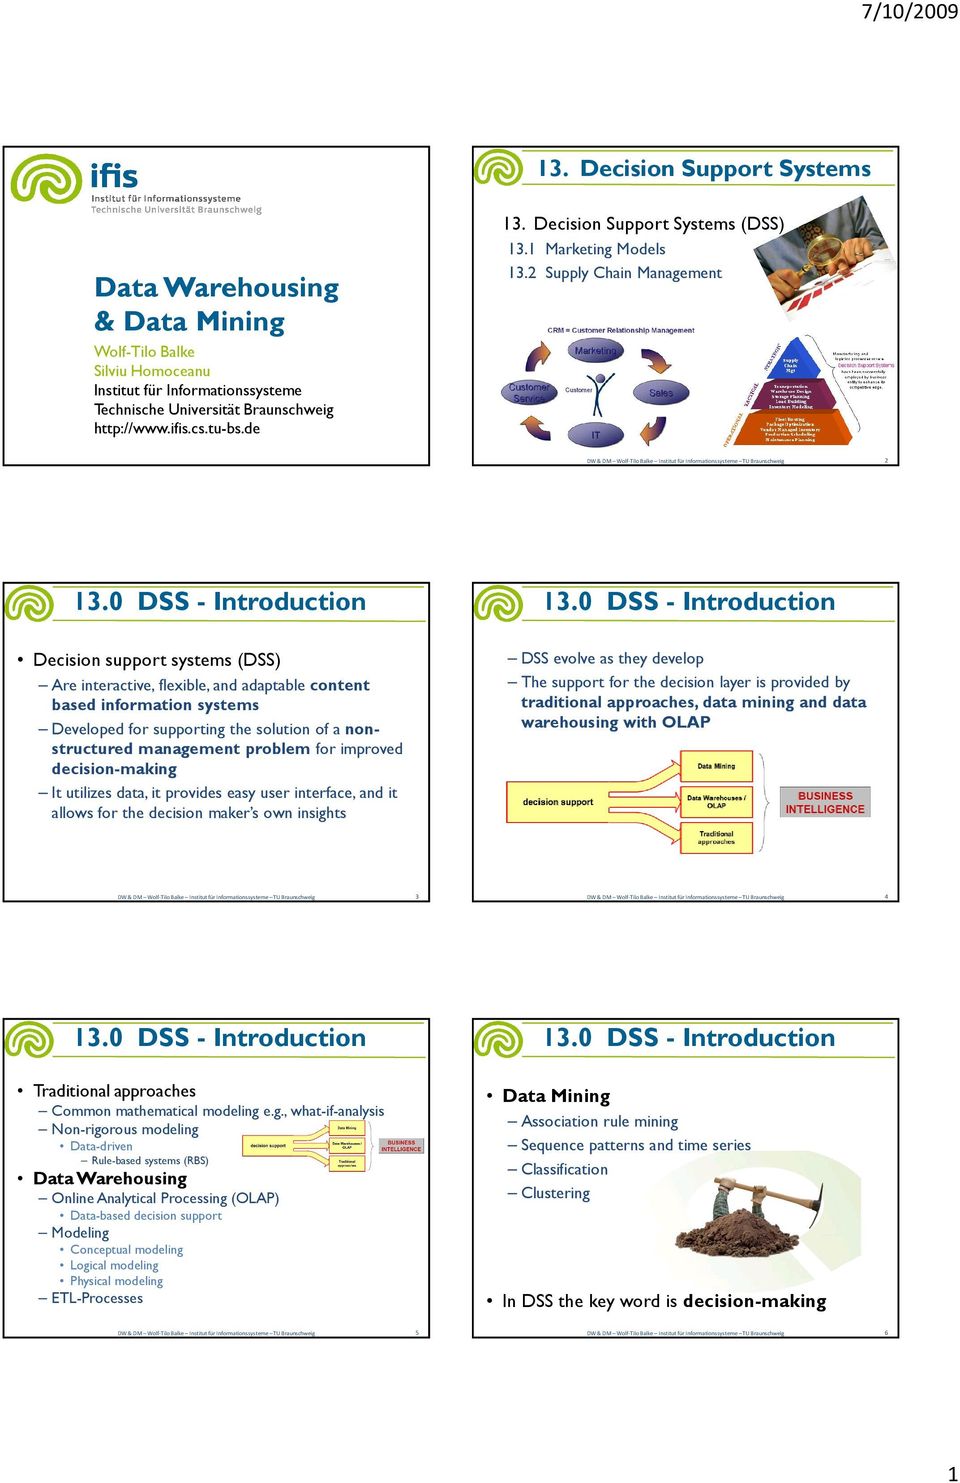 1 Marketing Models DW & DM Wolf-TiloBalke InstitutfürInformationssysteme TU Braunschweig 2 Decision support systems (DSS) Are interactive, flexible, and adaptable content based information systems